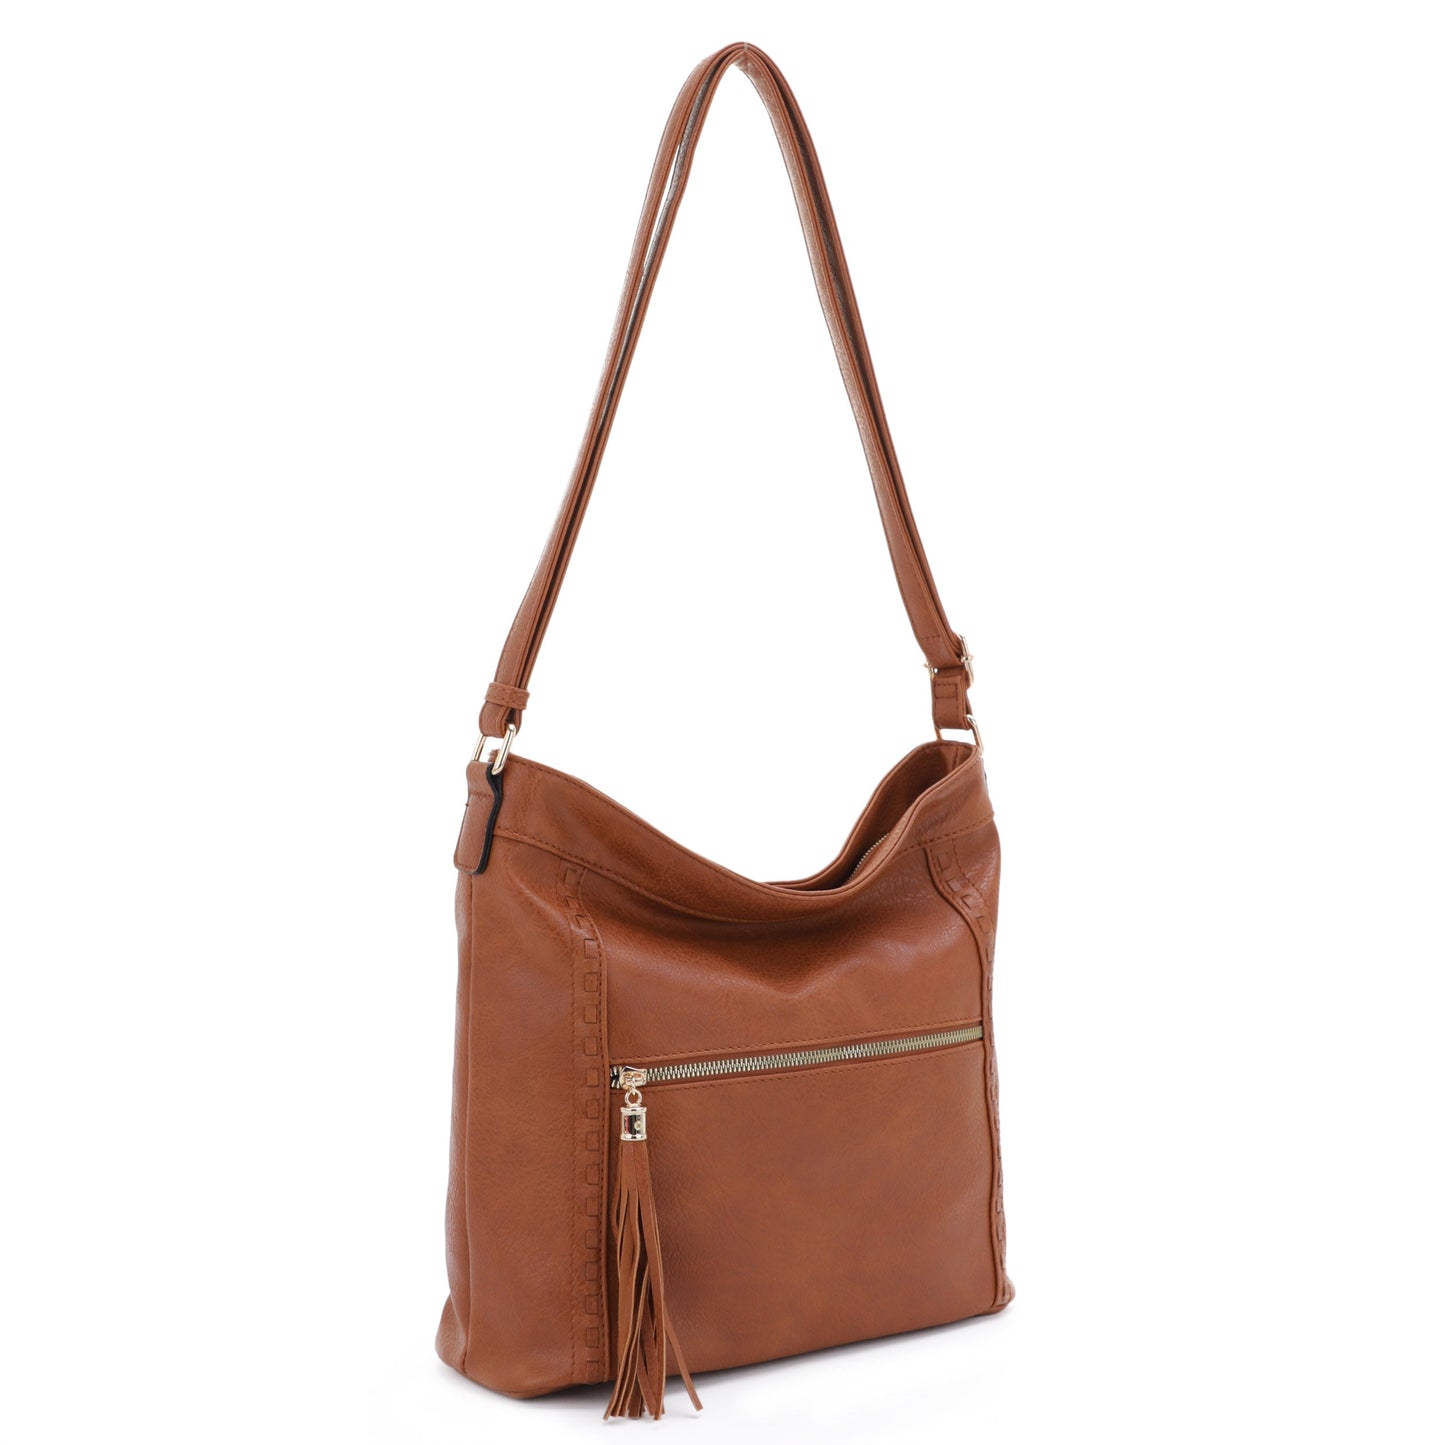 Whipstitch Accent with Tassel Hobo Bag